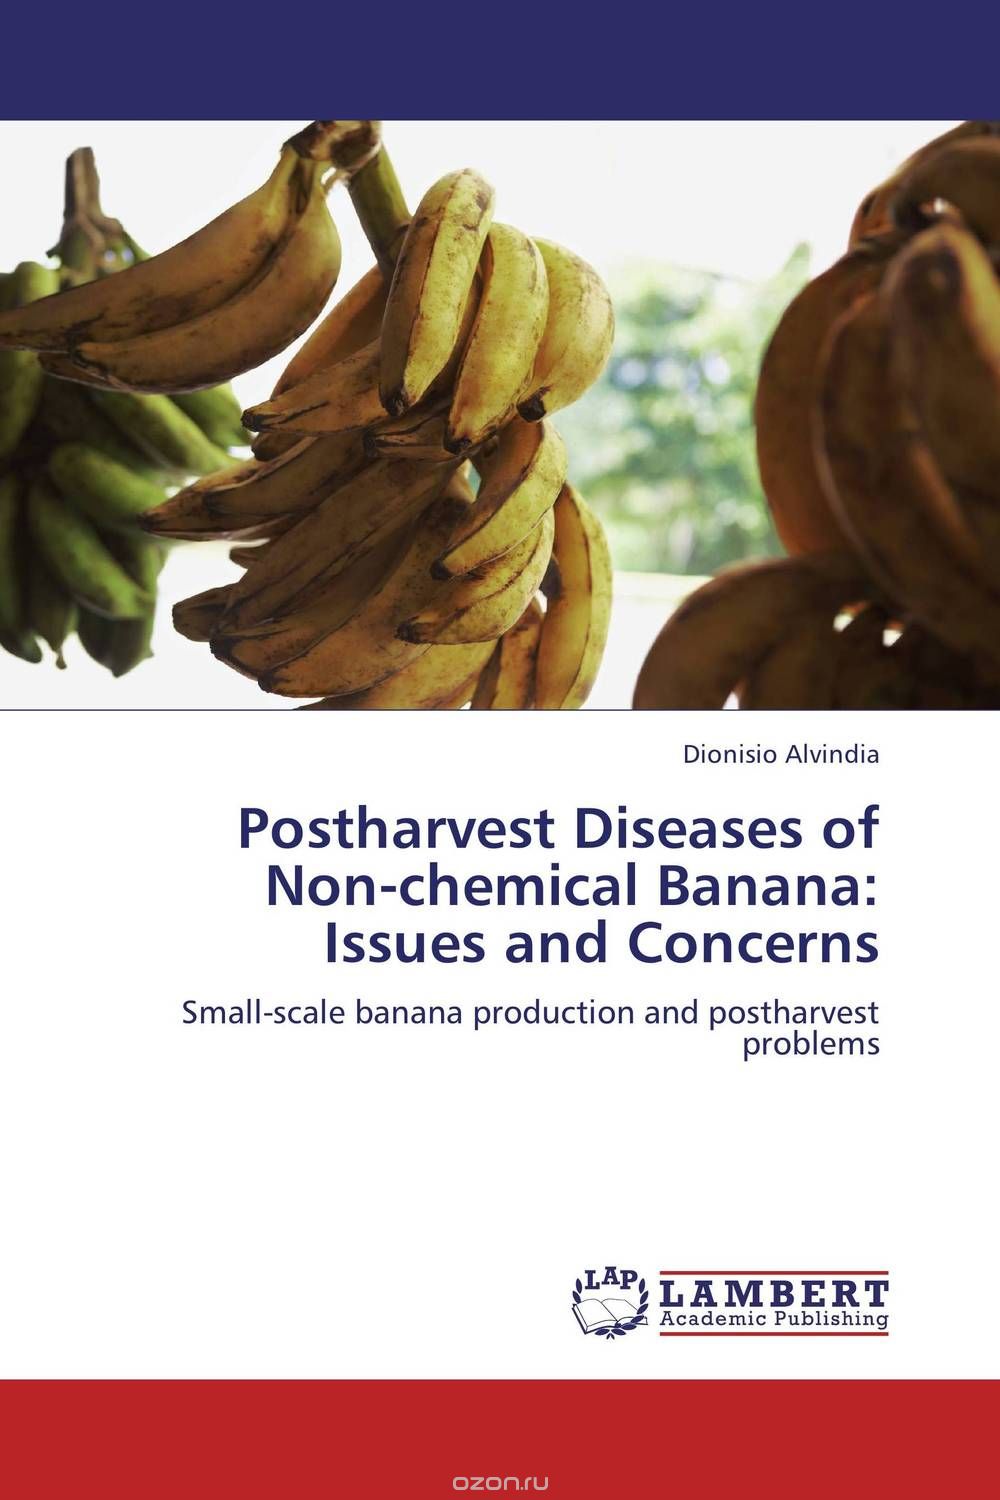 Postharvest Diseases of Non-chemical Banana: Issues and Concerns